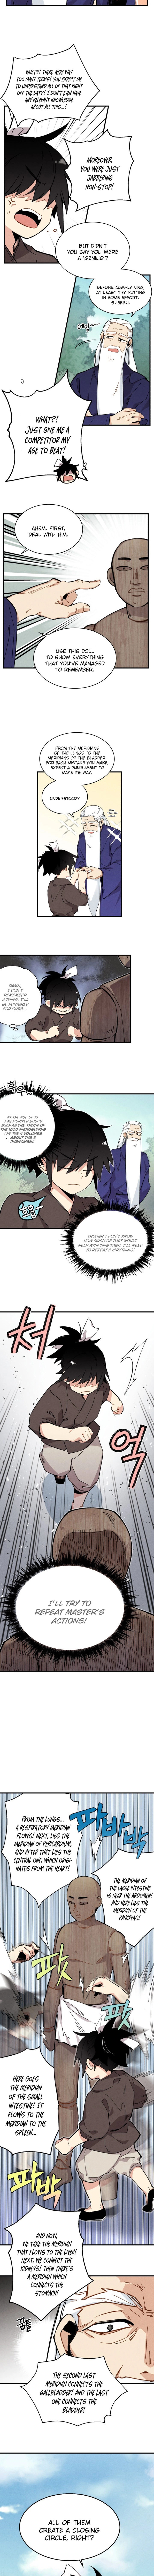 Lightning Degree - Chapter 6 Page 3